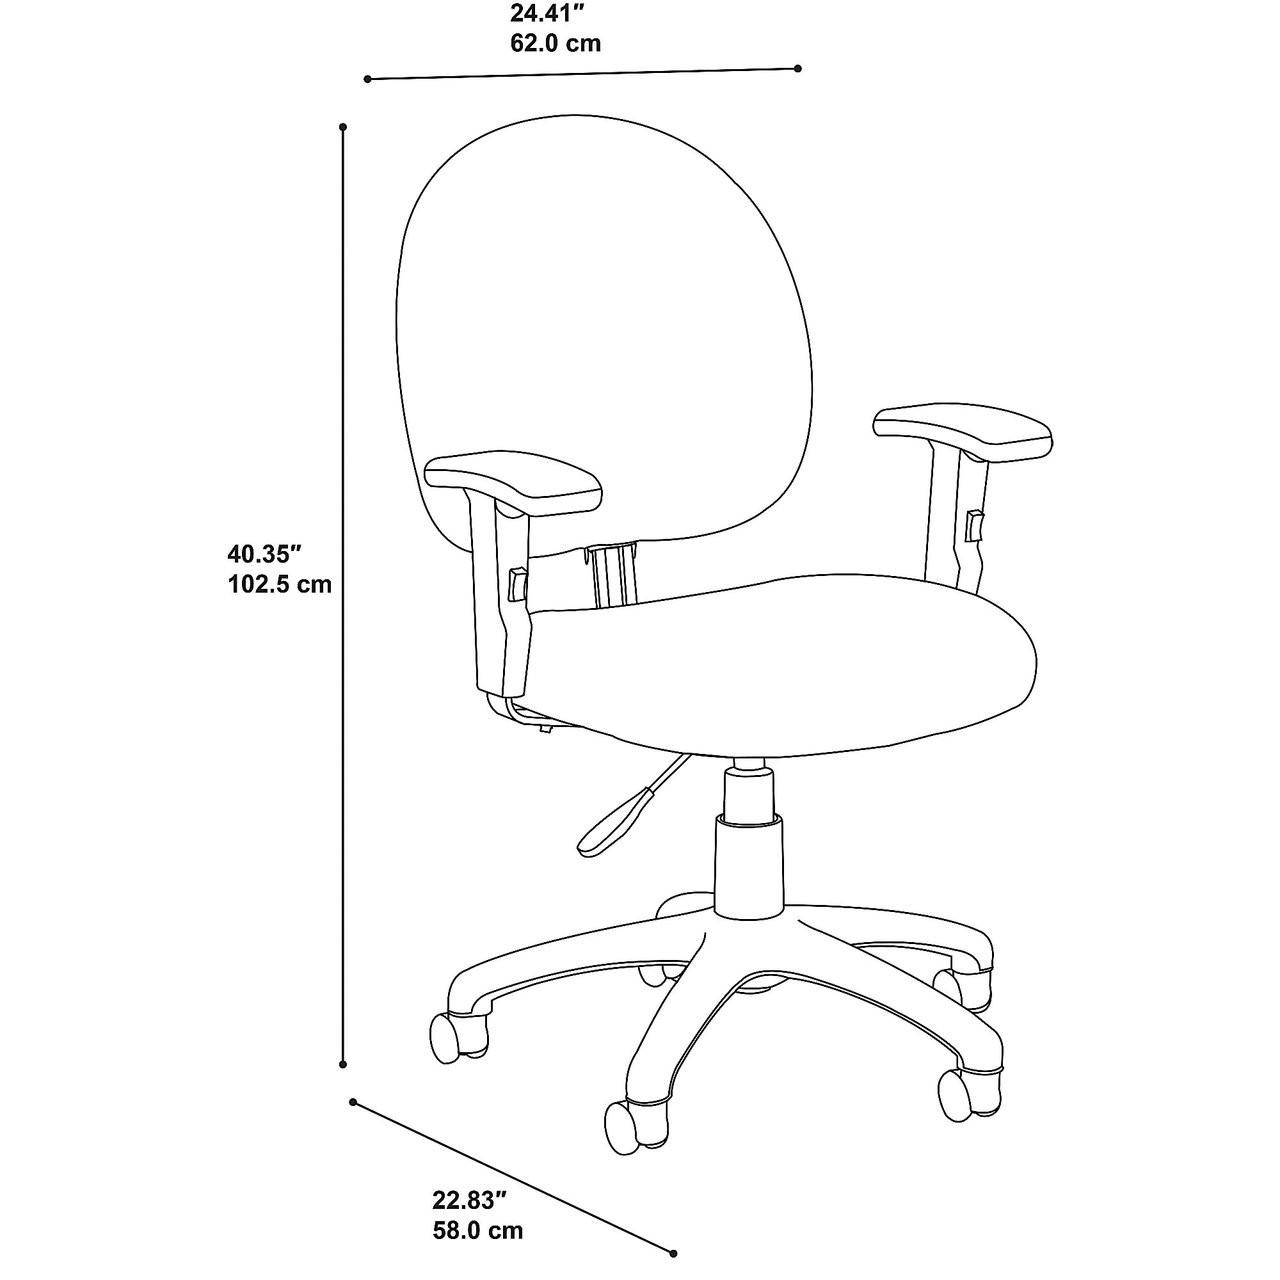  Bush Business Furniture Accord Task Chair with Arms 